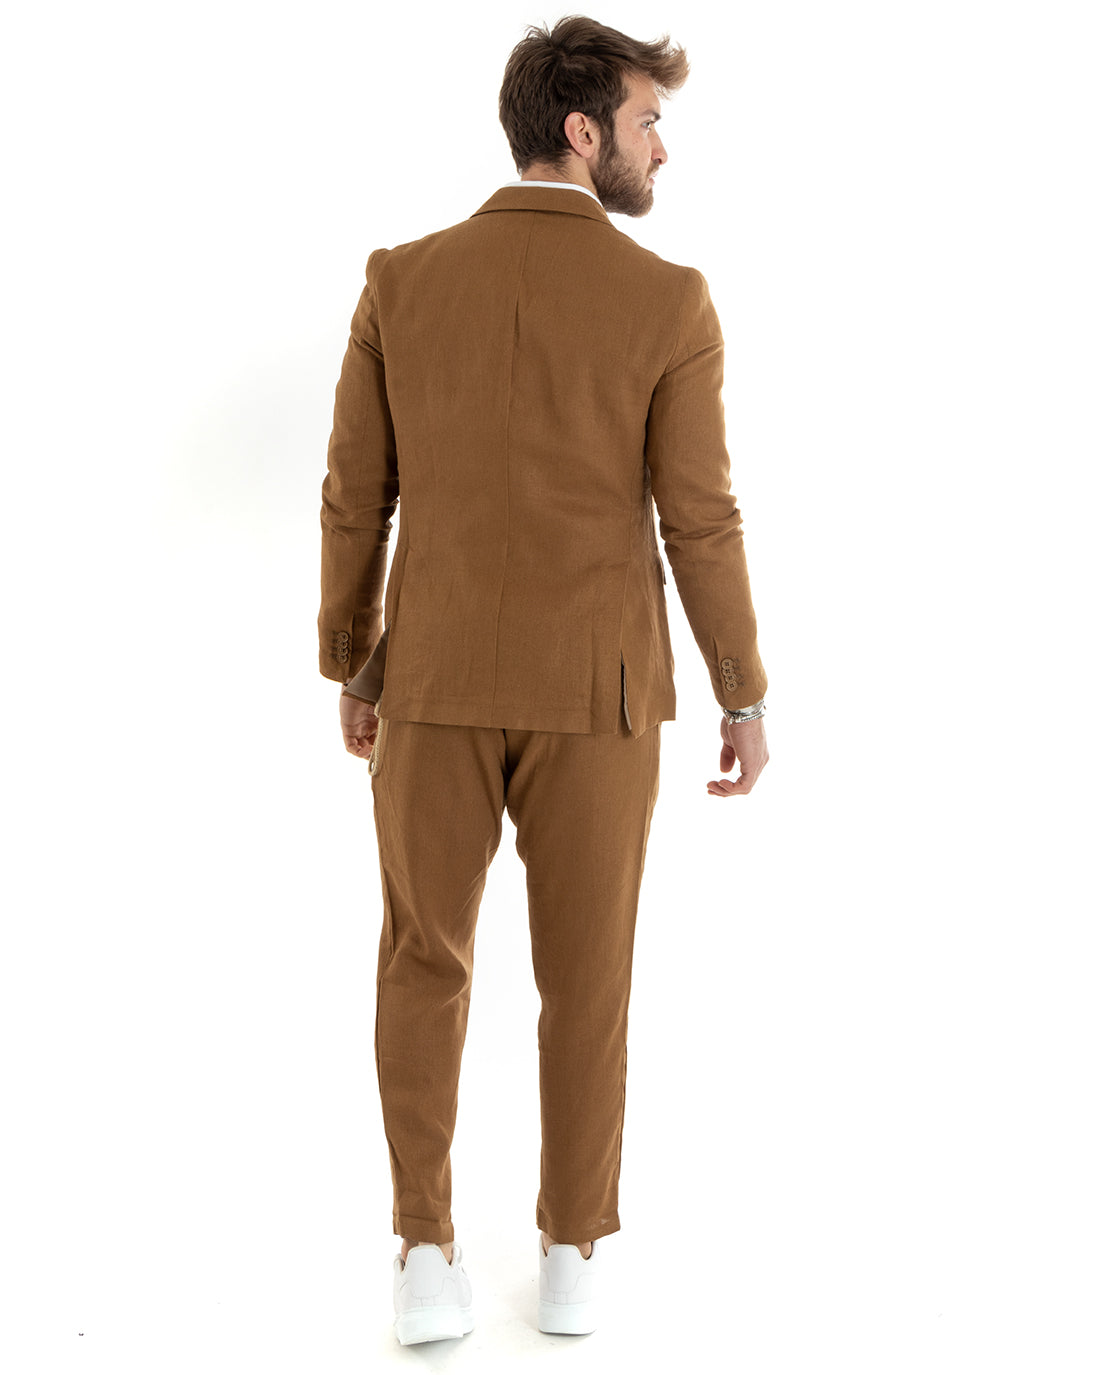 Double-breasted men's suit, tailored linen suit, jacket and trousers in solid color Camel GIOSAL-OU2334A